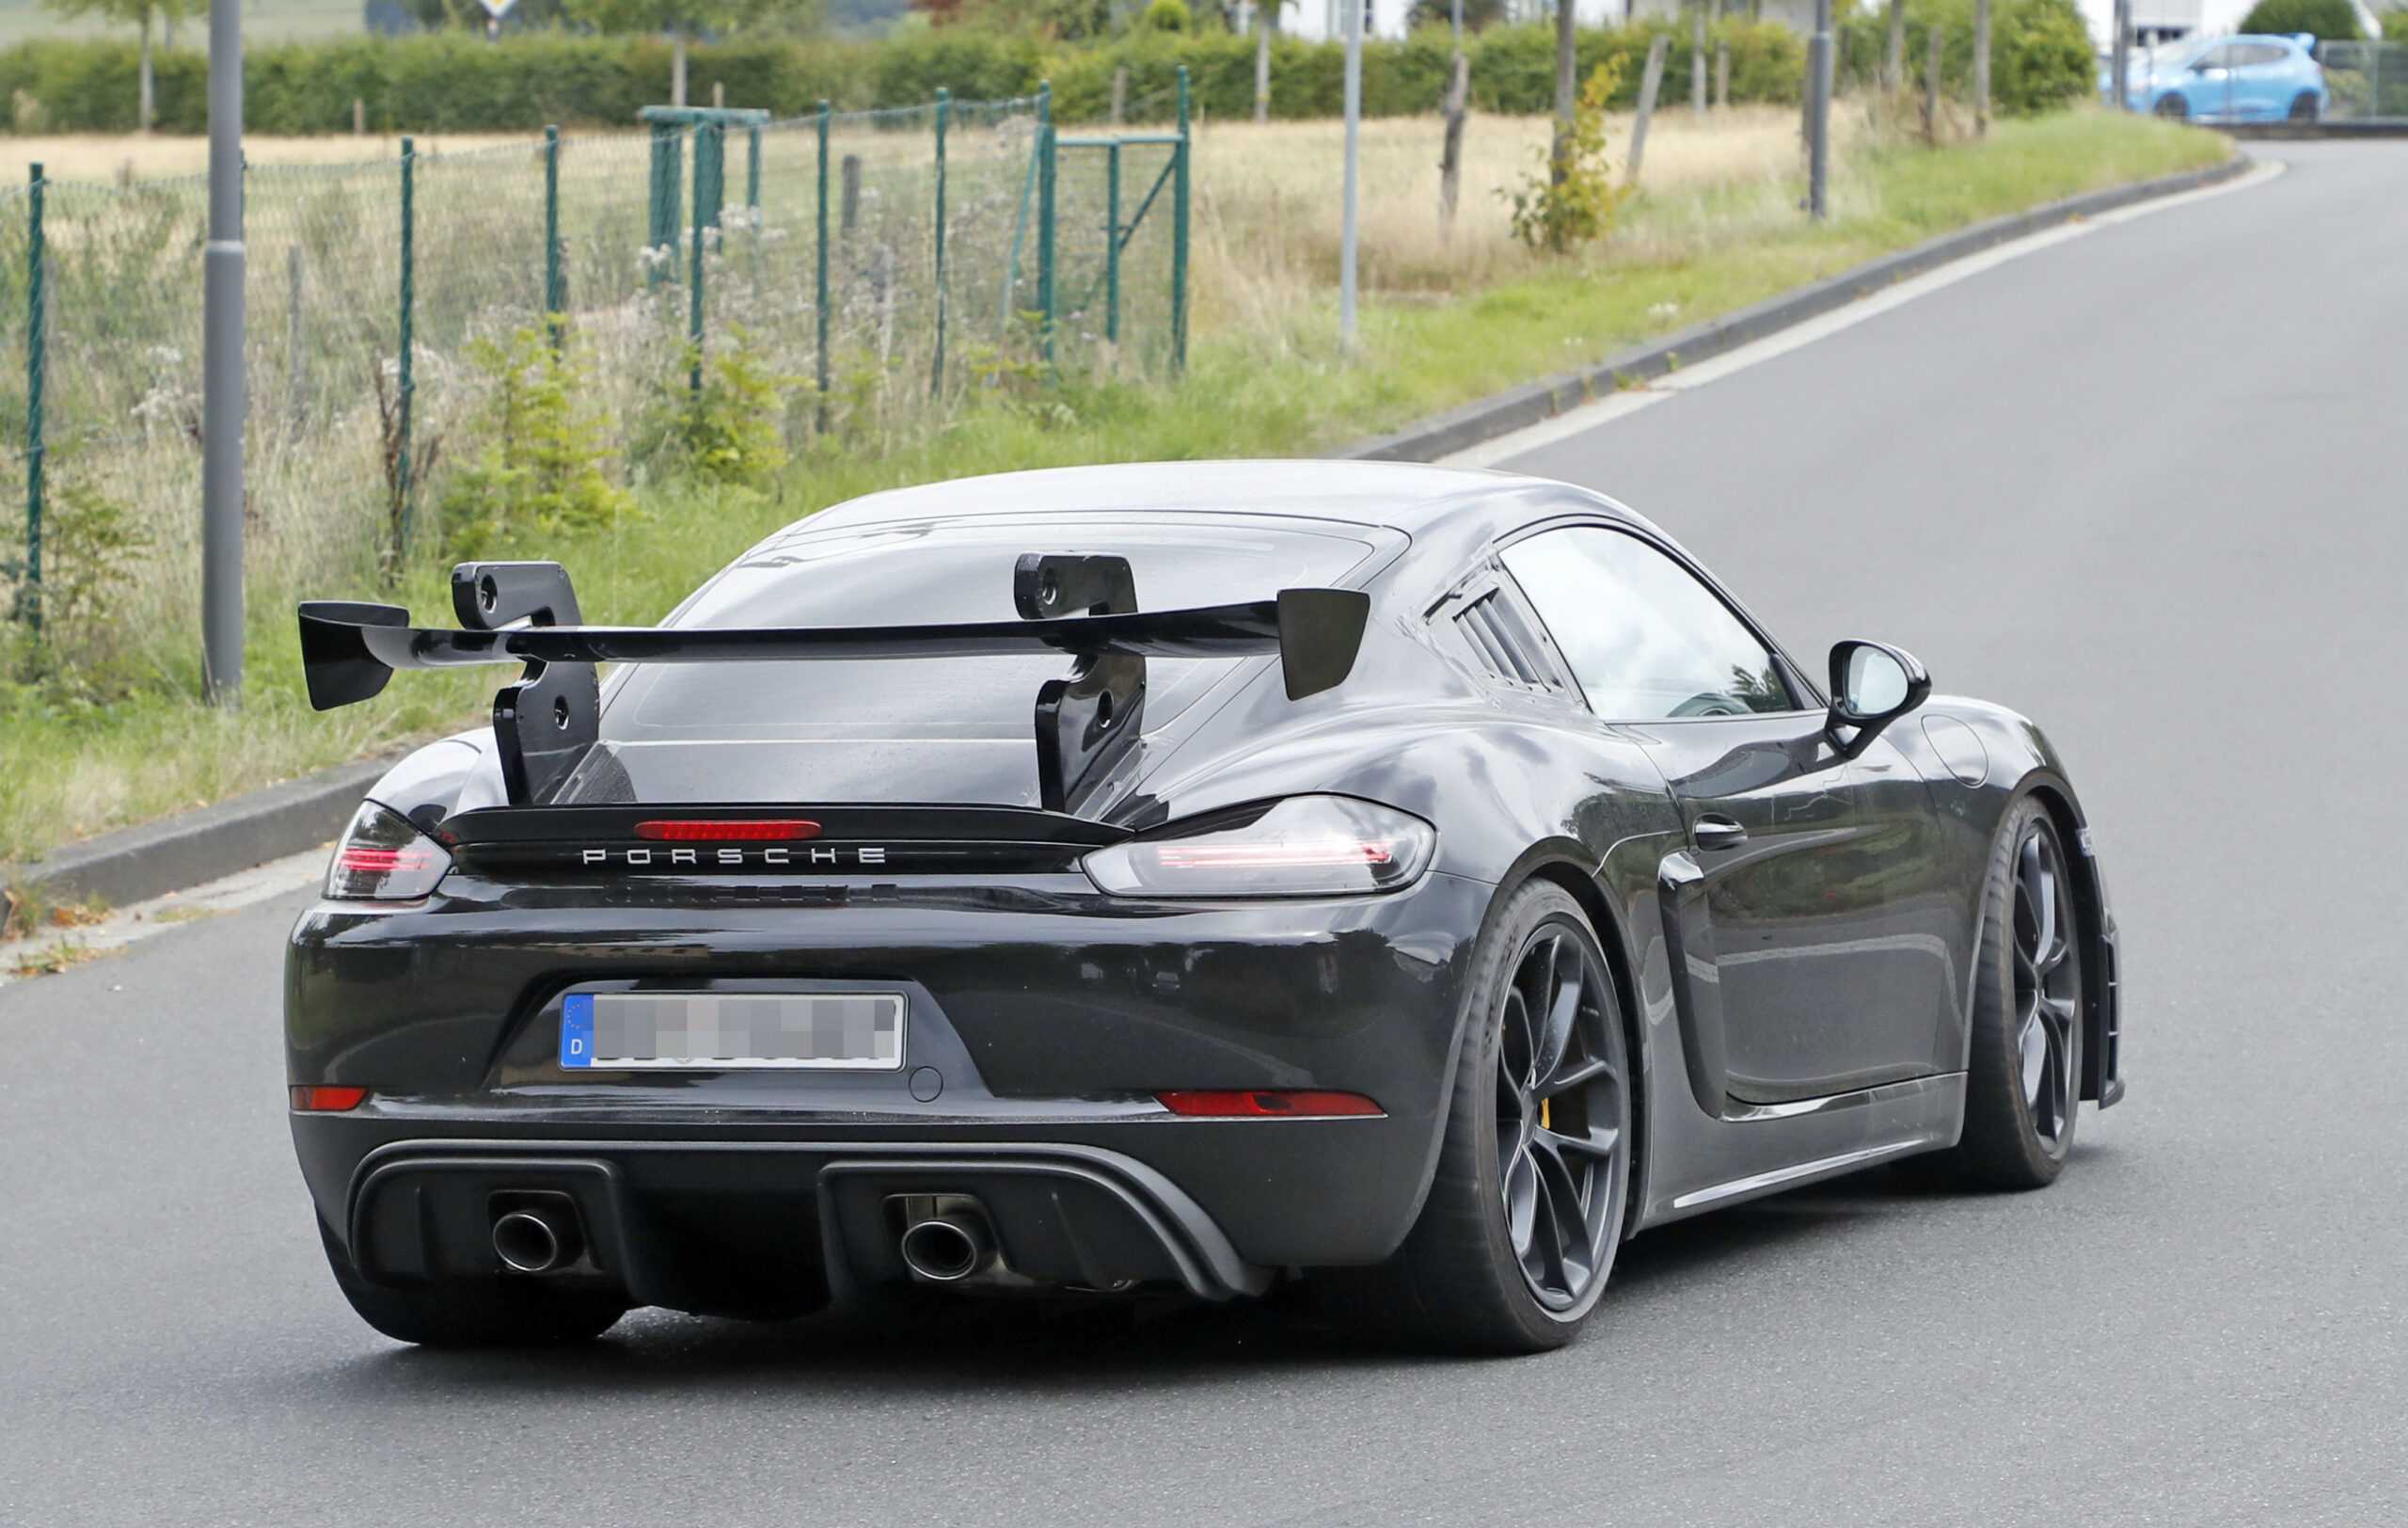 Here's what we know about the porsche 718 cayman gt4 rs